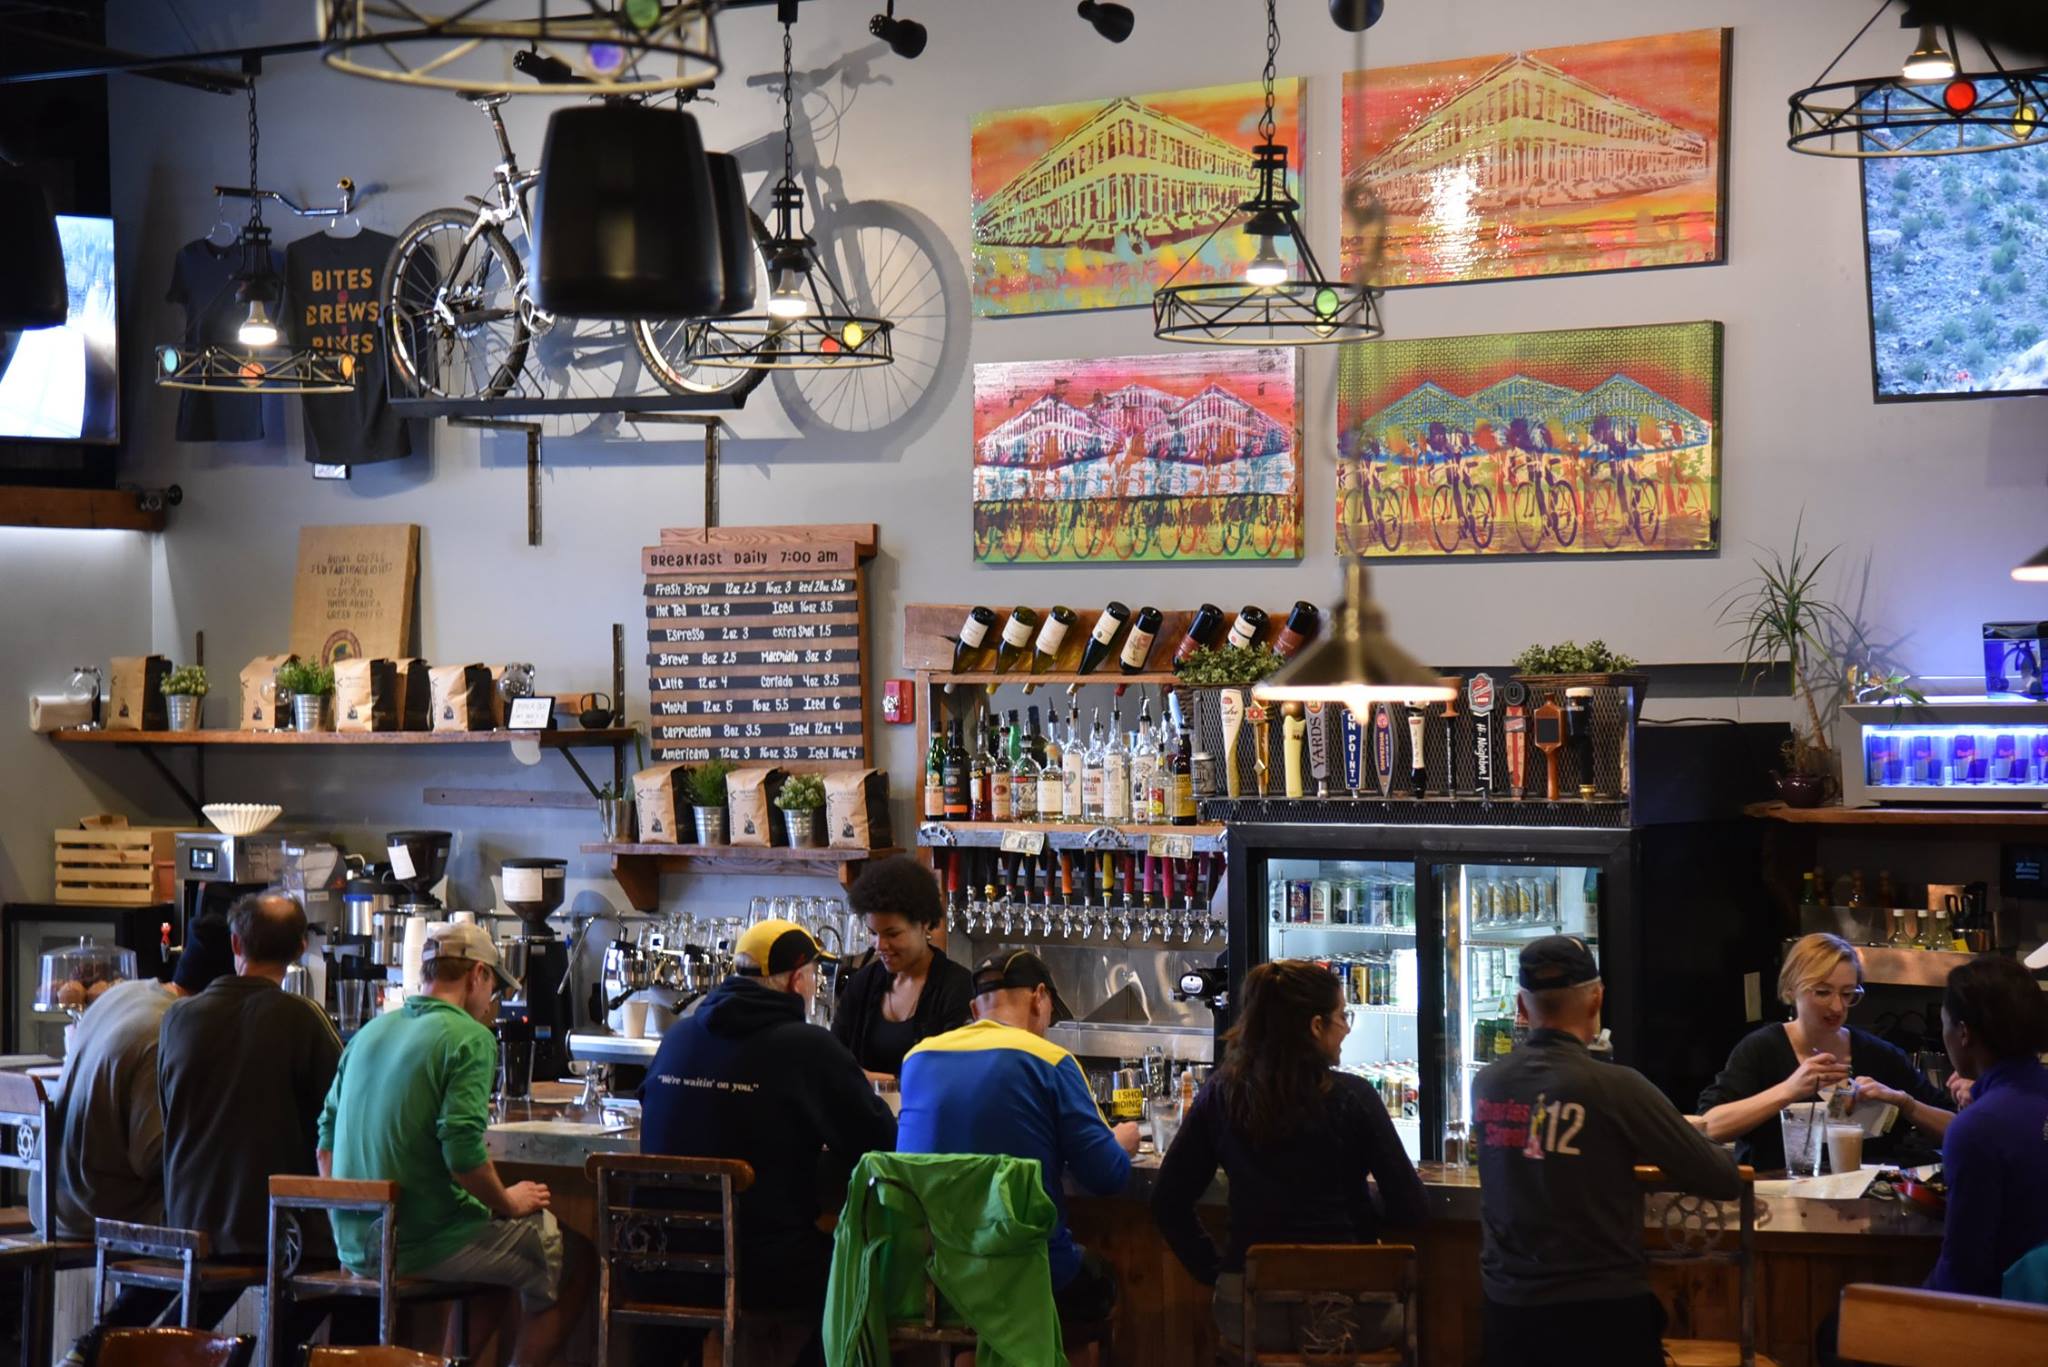 The HandleBar Café and Bike Shop is decorated with bike-themed art, the hand made bar stools and bar top feature bike components, and the bar taps have mountain bike grips for handles. Bikes are displayed throughout the space.